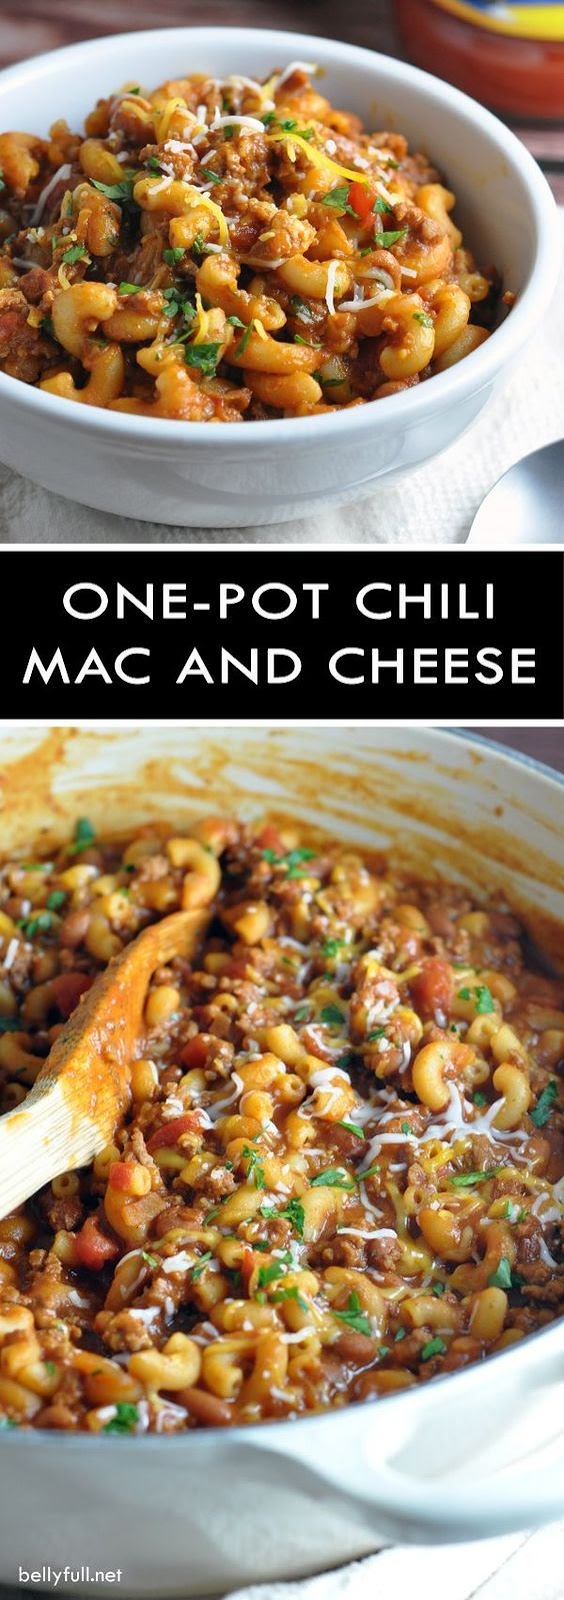 Two favorite comfort foods come together in this super easy, one-pot dish that the whole family will go crazy for!